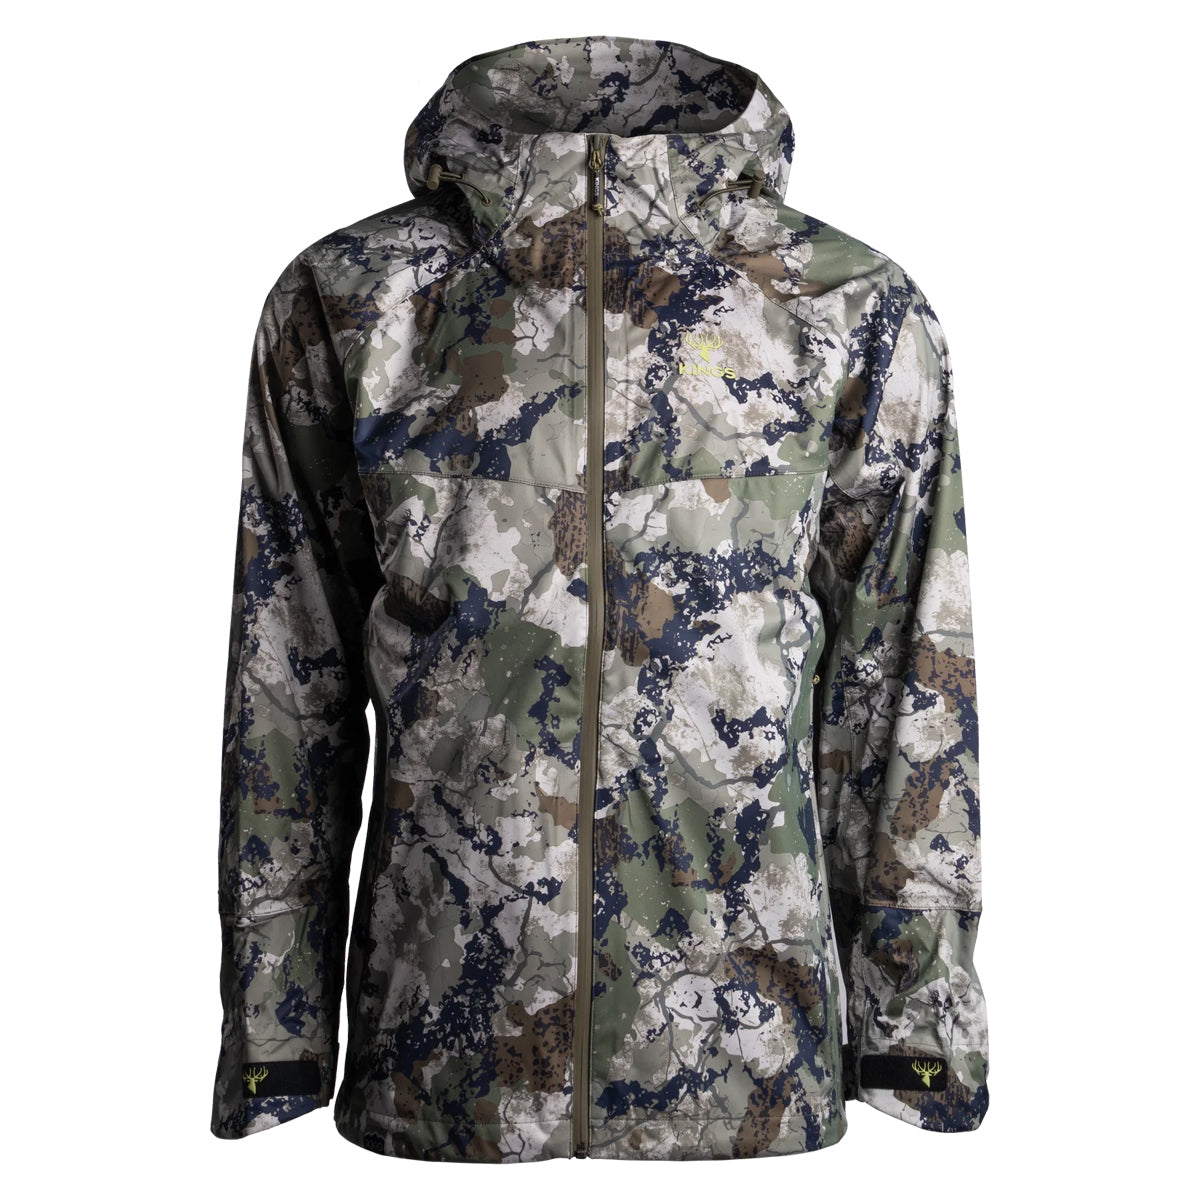 King's XKG Paramount Rain Jacket in  by GOHUNT | King's - GOHUNT Shop